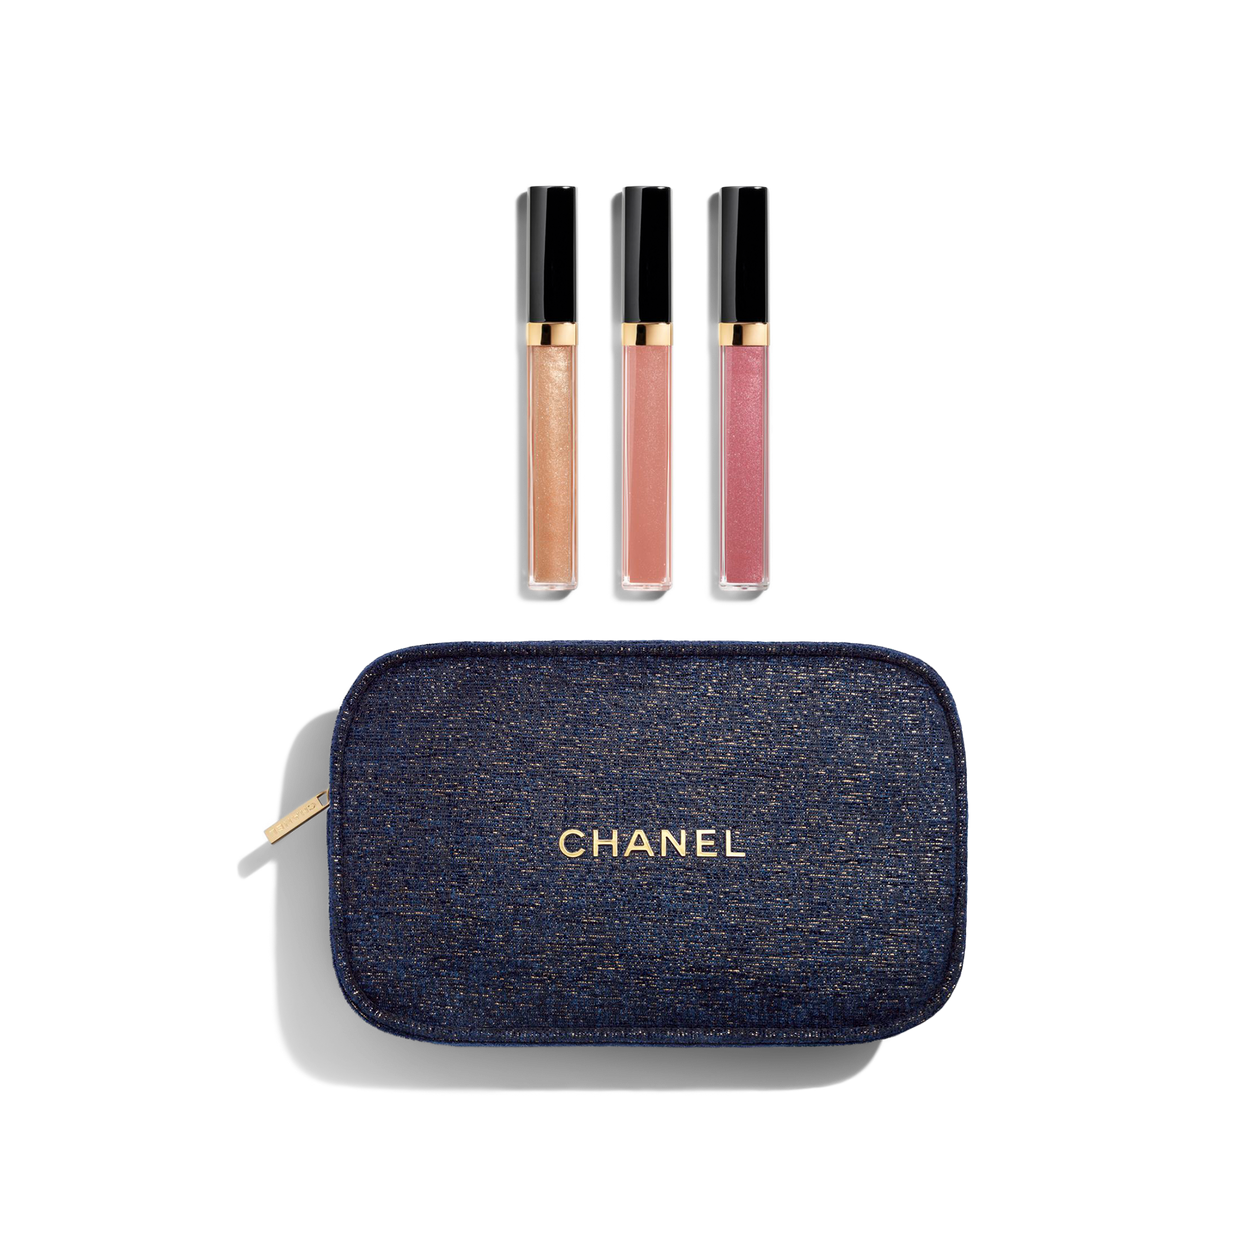 chanel makeup sets for women gift